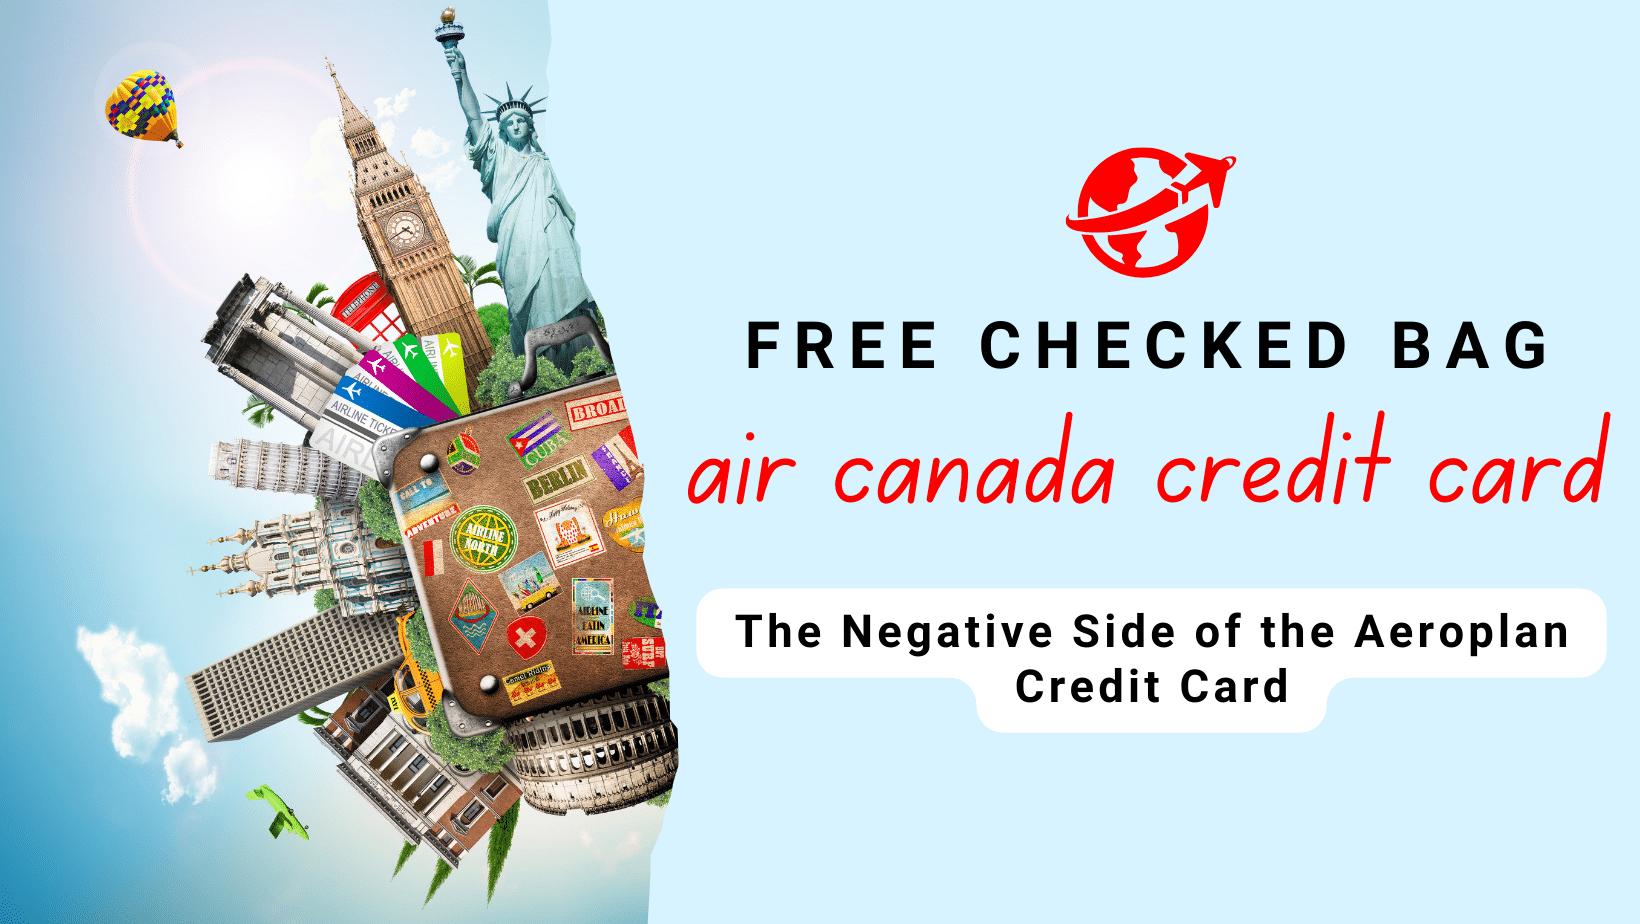 The Downsides to the Air Canada Free Checked Bag Aeroplan Credit Cards